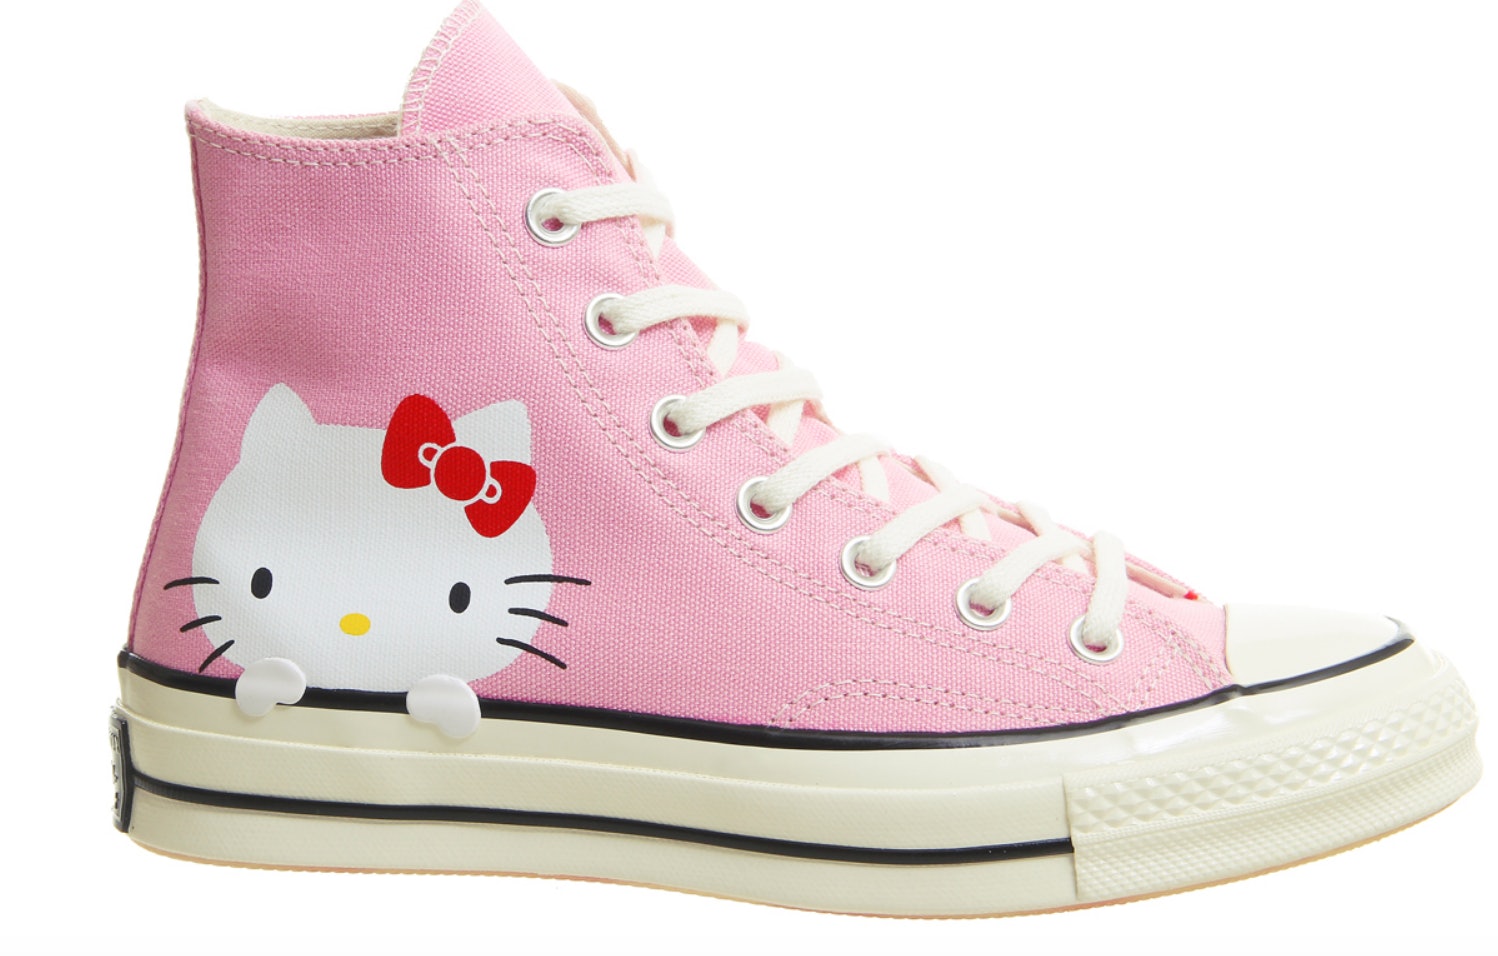 converse hello kitty trainers